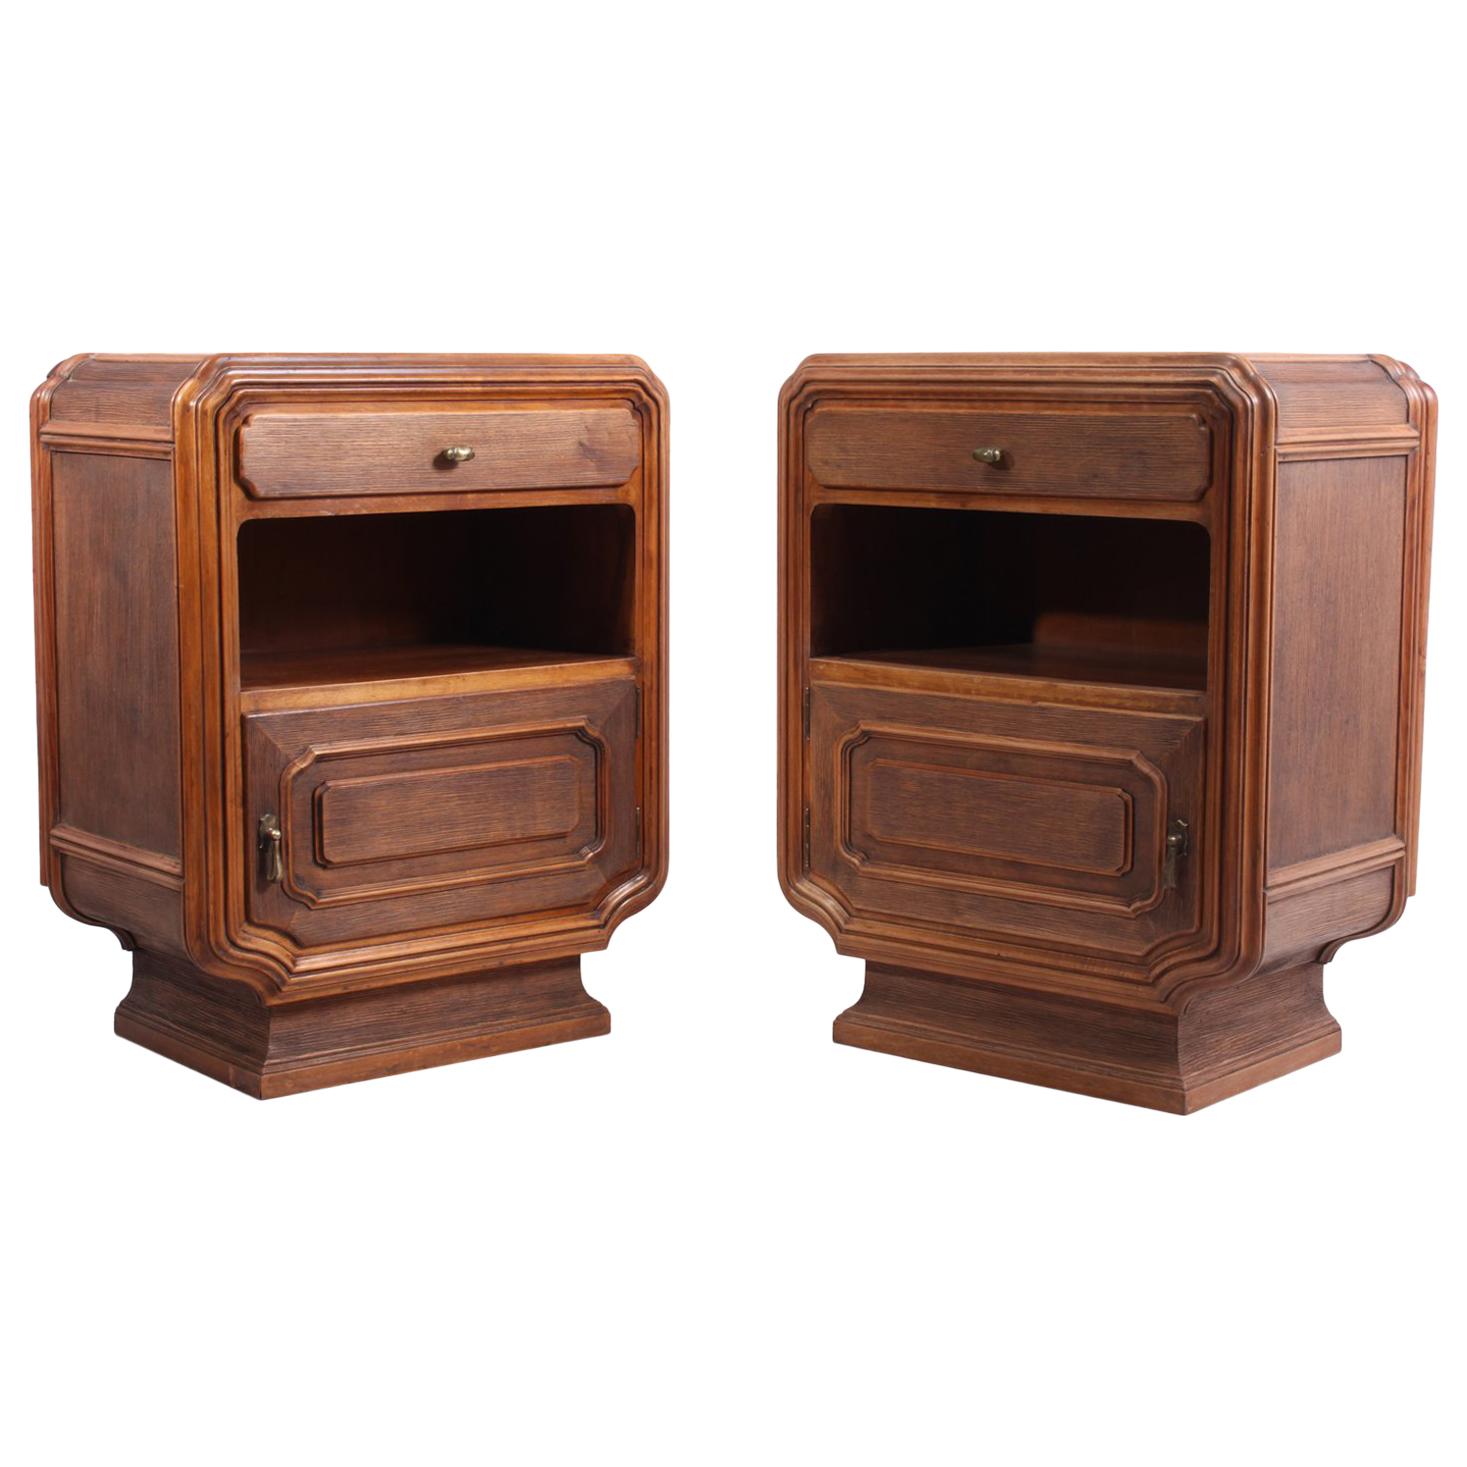 Pair of Rustic Italian Bedside Cabinets, circa 1920